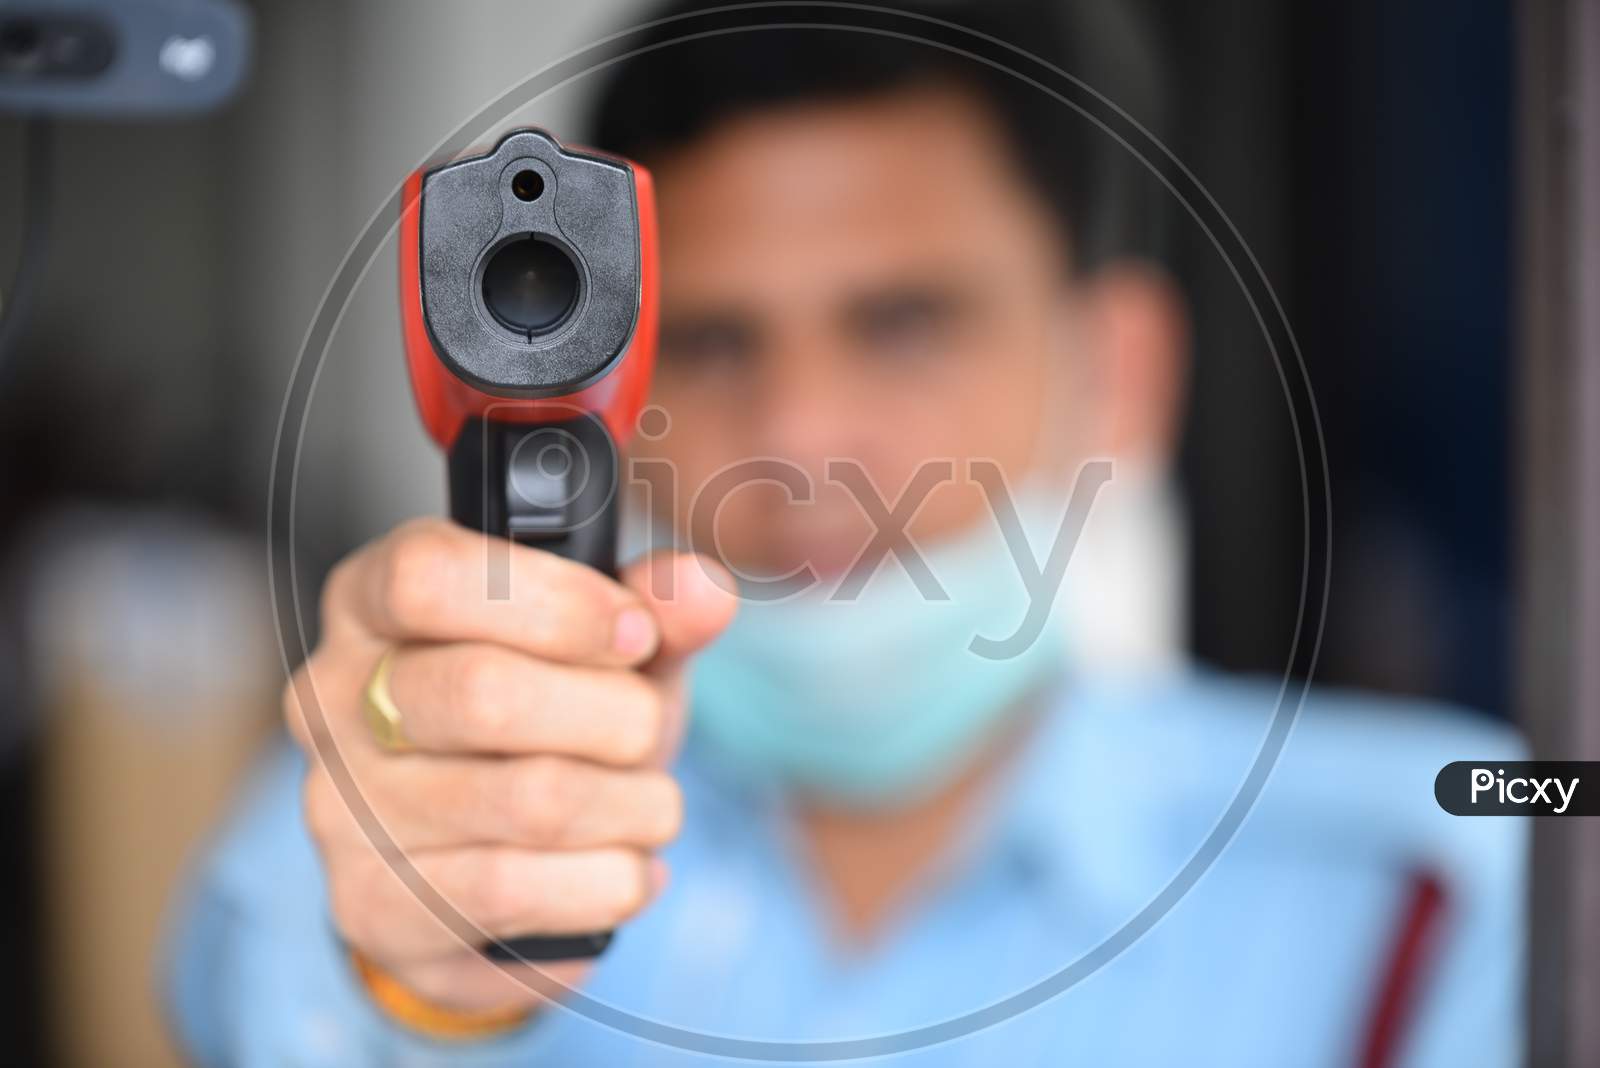 A security personnel using Infrared Thermometer using Laser Radiation to find out the Human Body temperature as fever is one of the symptoms of COVID19 Corona Virus